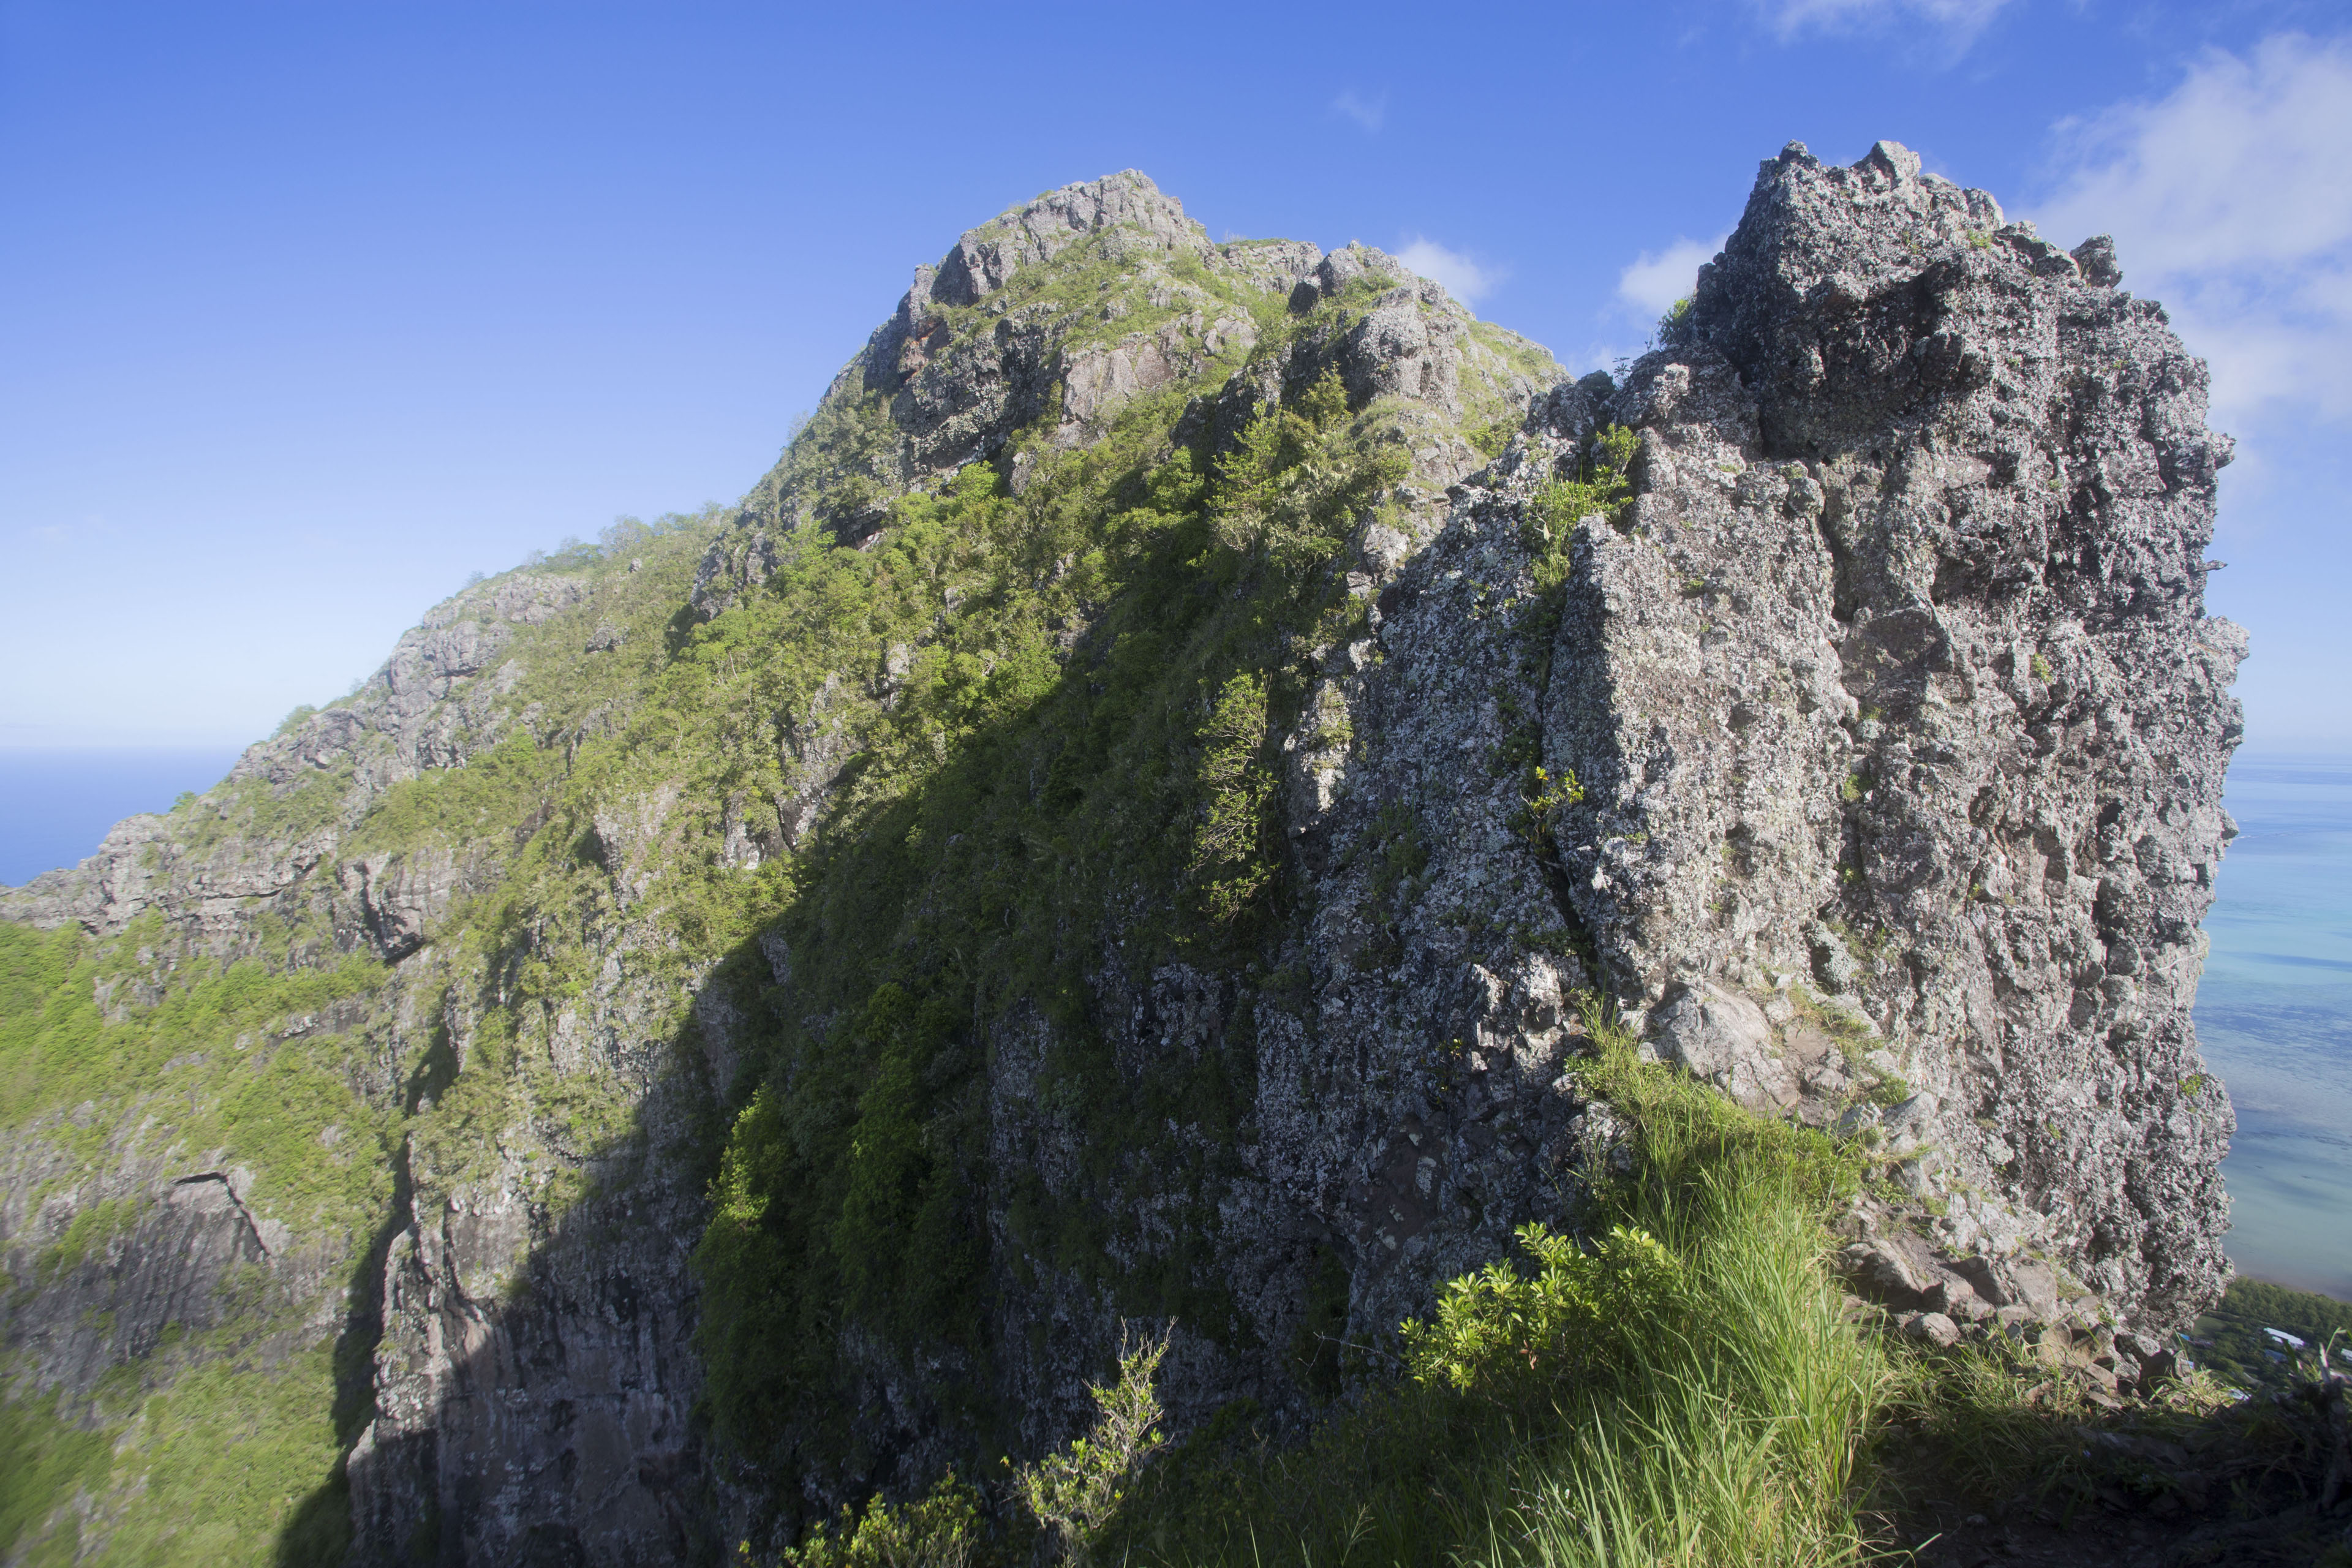 View towards the summit of Le Morne Brabant | Le Morne Brabant | Mauritius